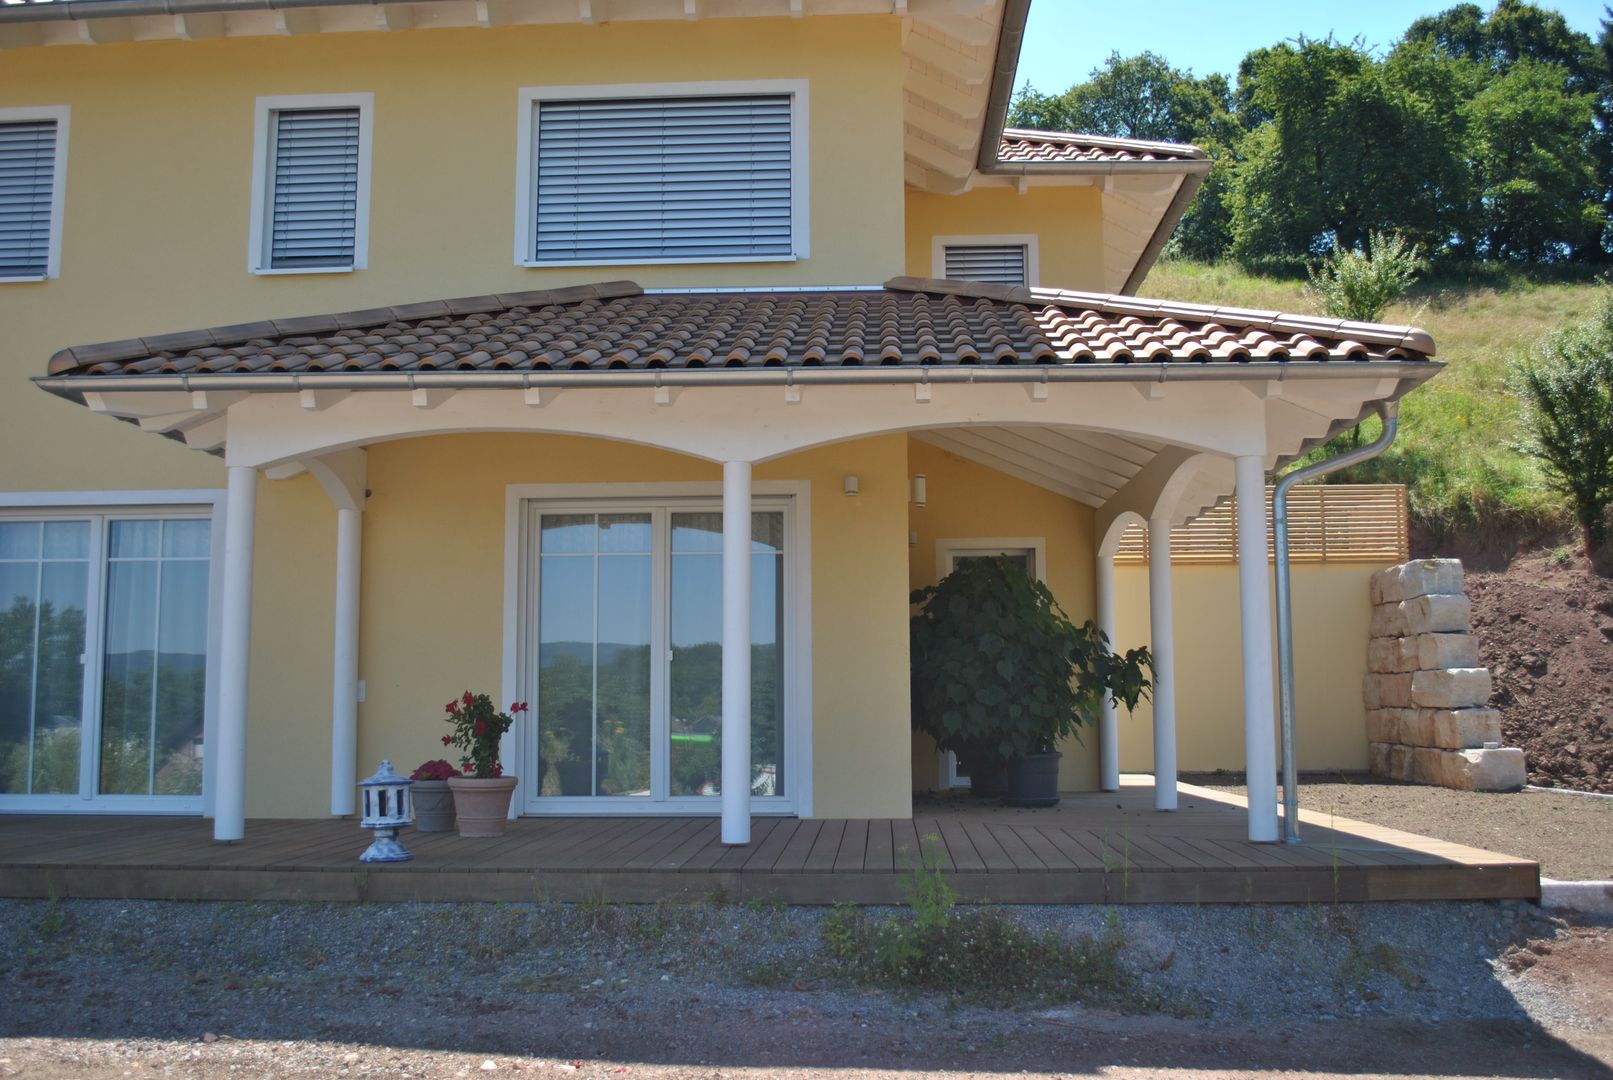 Villa Rimbach, Froese Dach Froese Dach Mediterranean style house